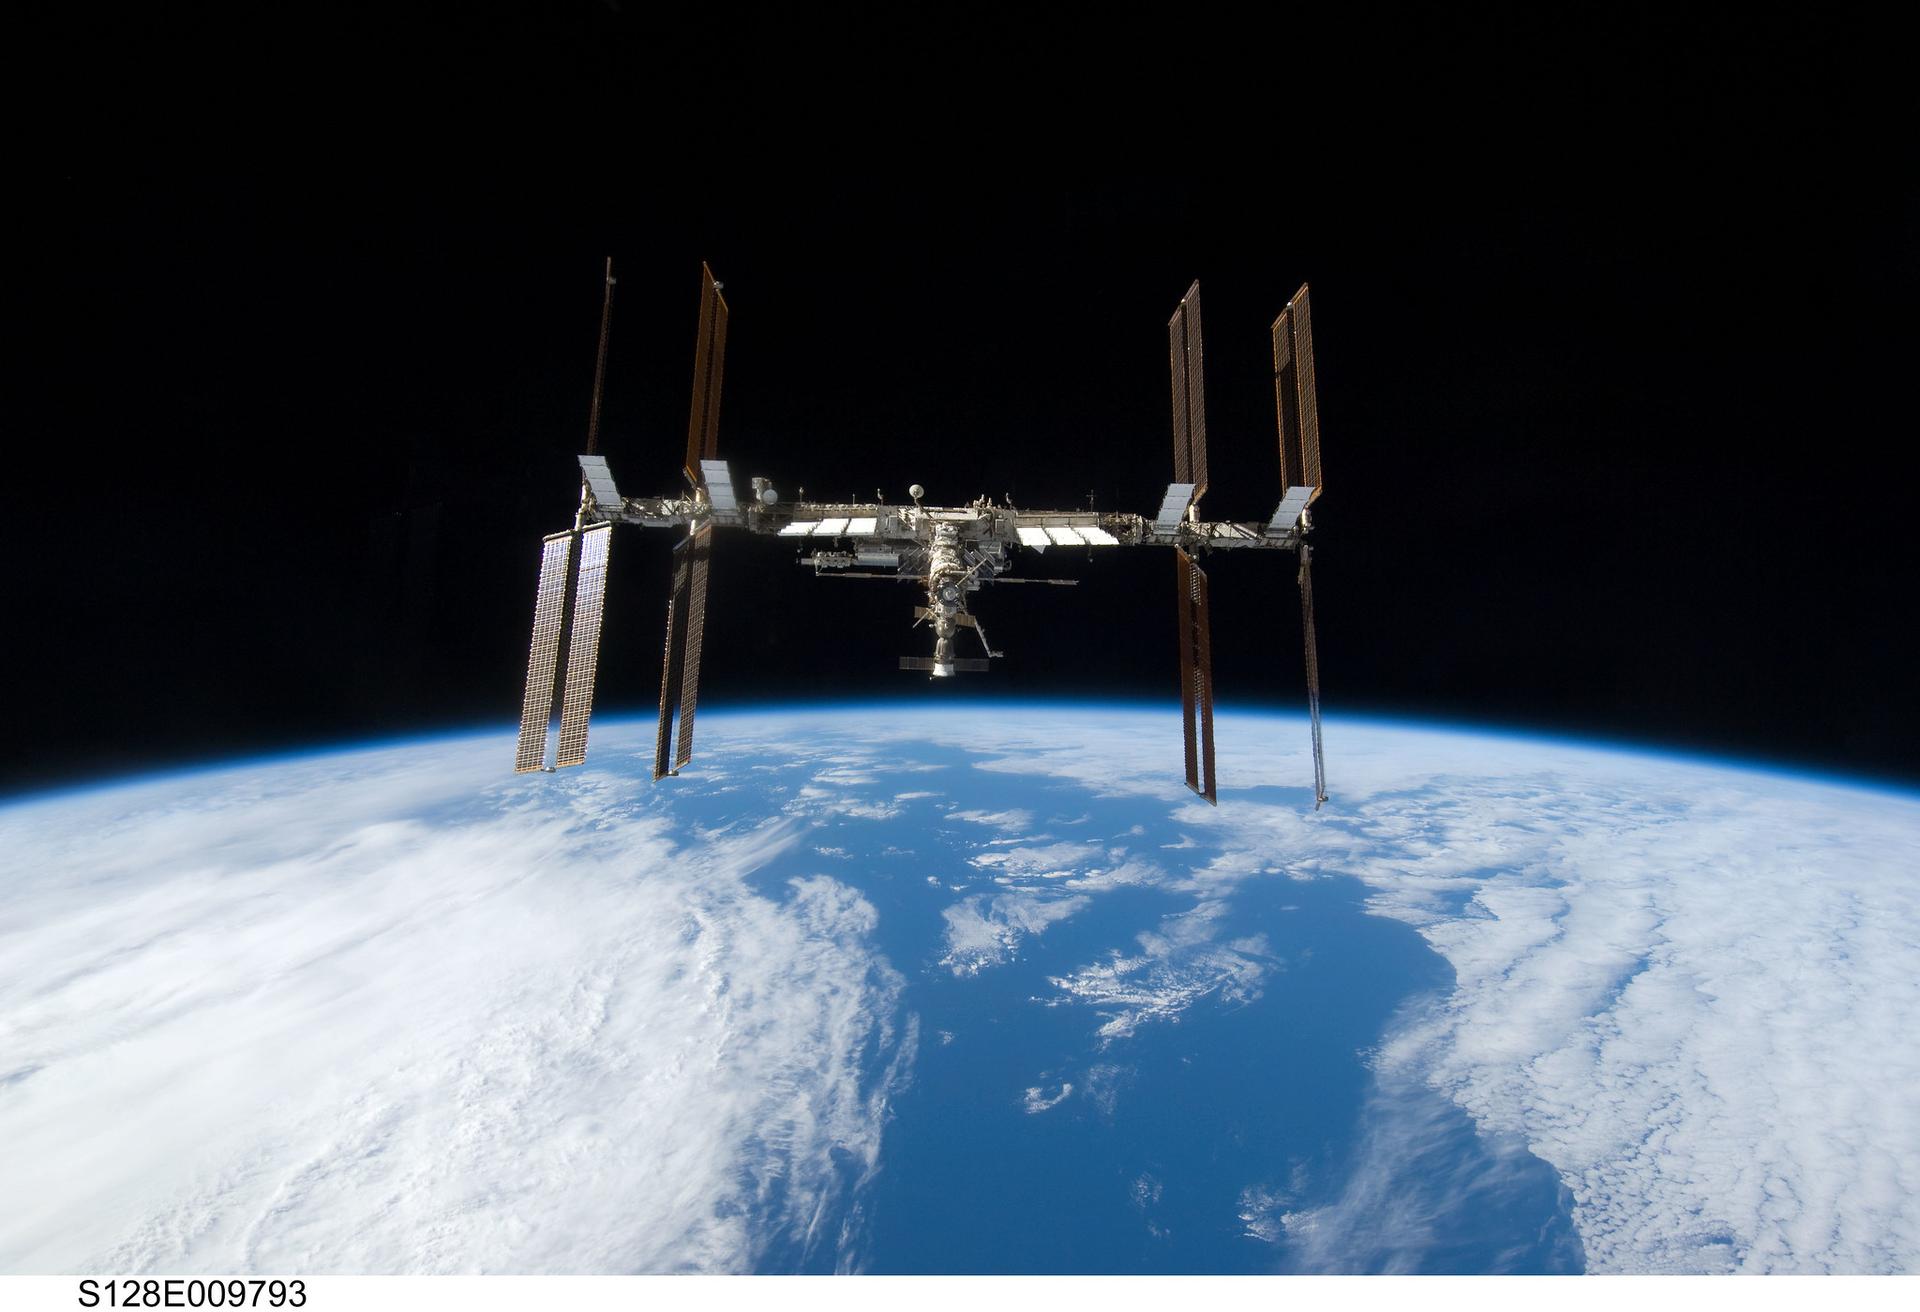 The International Space Station is a great example of how space has, for the most part, been a peaceful and collaborative international arena.